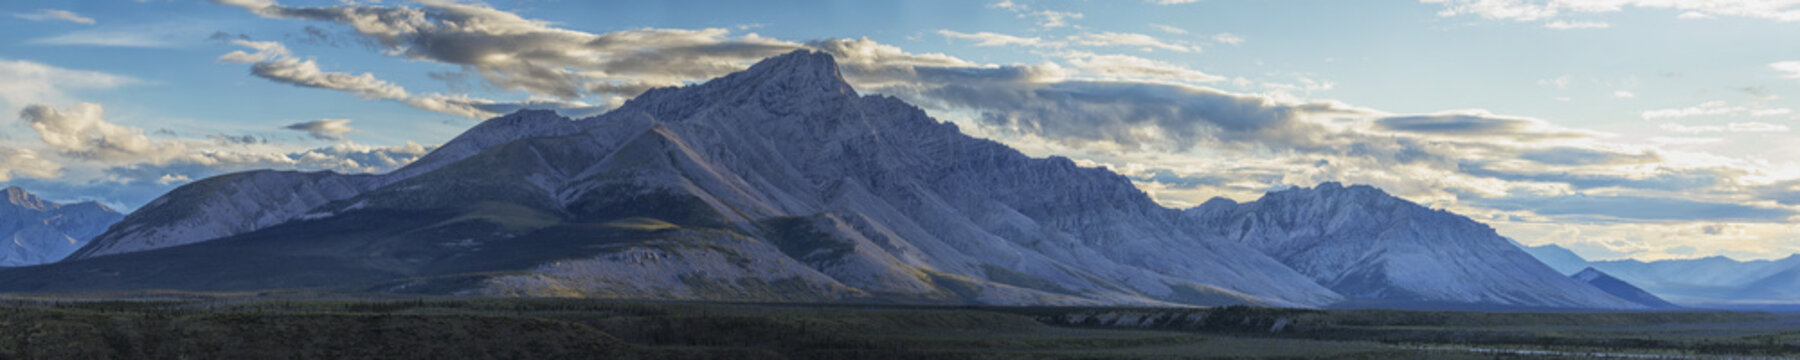 Panoramic Image Of Royal Mountain Along The Wind River, Peel Watershed; Yukon, Canada